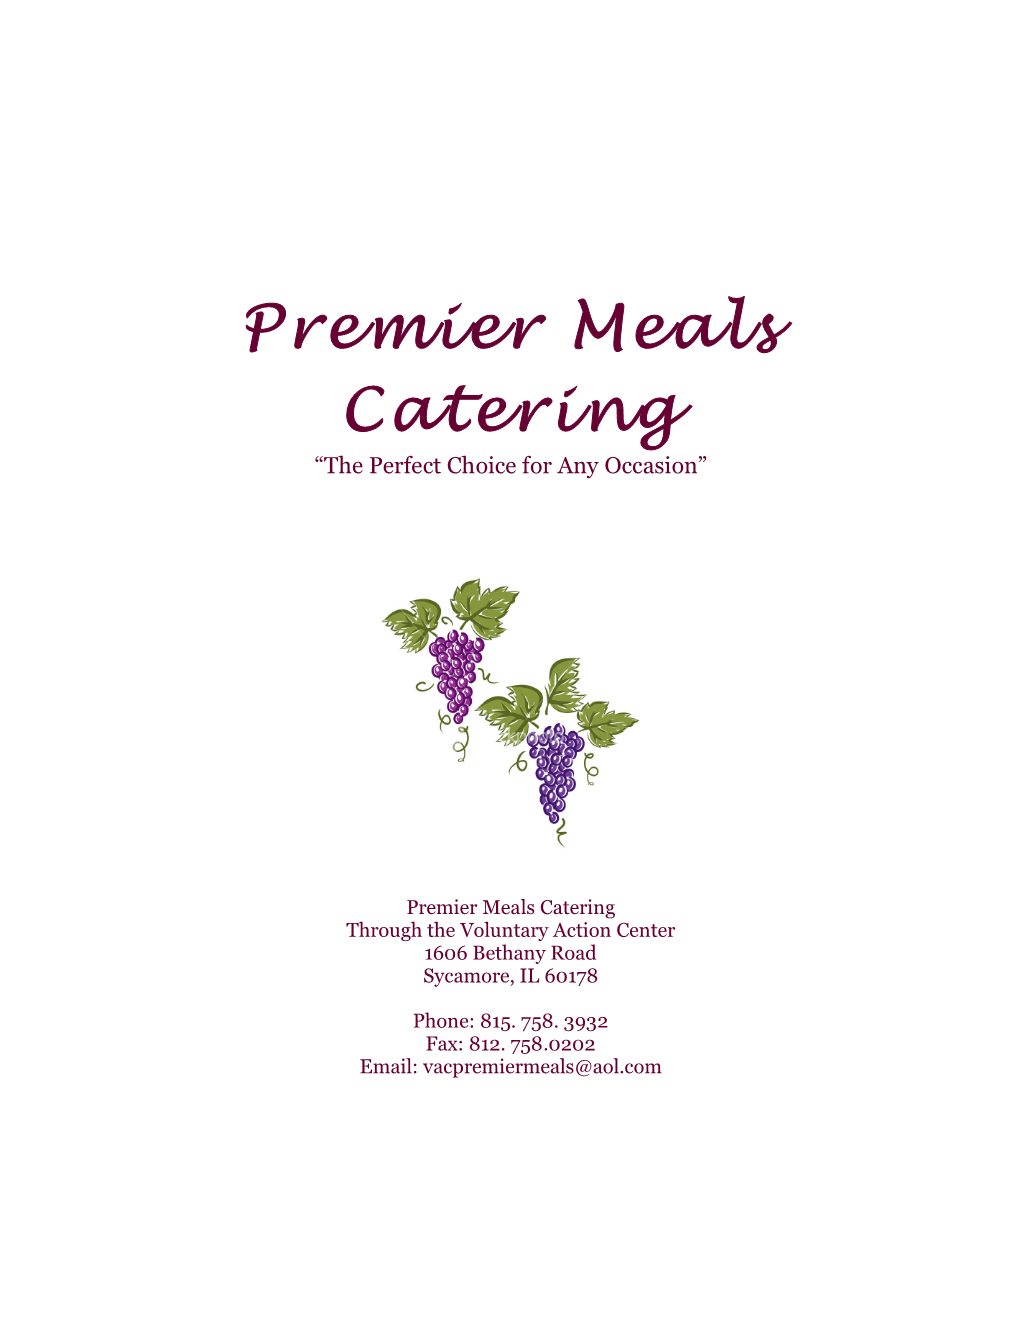 Premier Meals Catering “The Perfect Choice for Any Occasion”